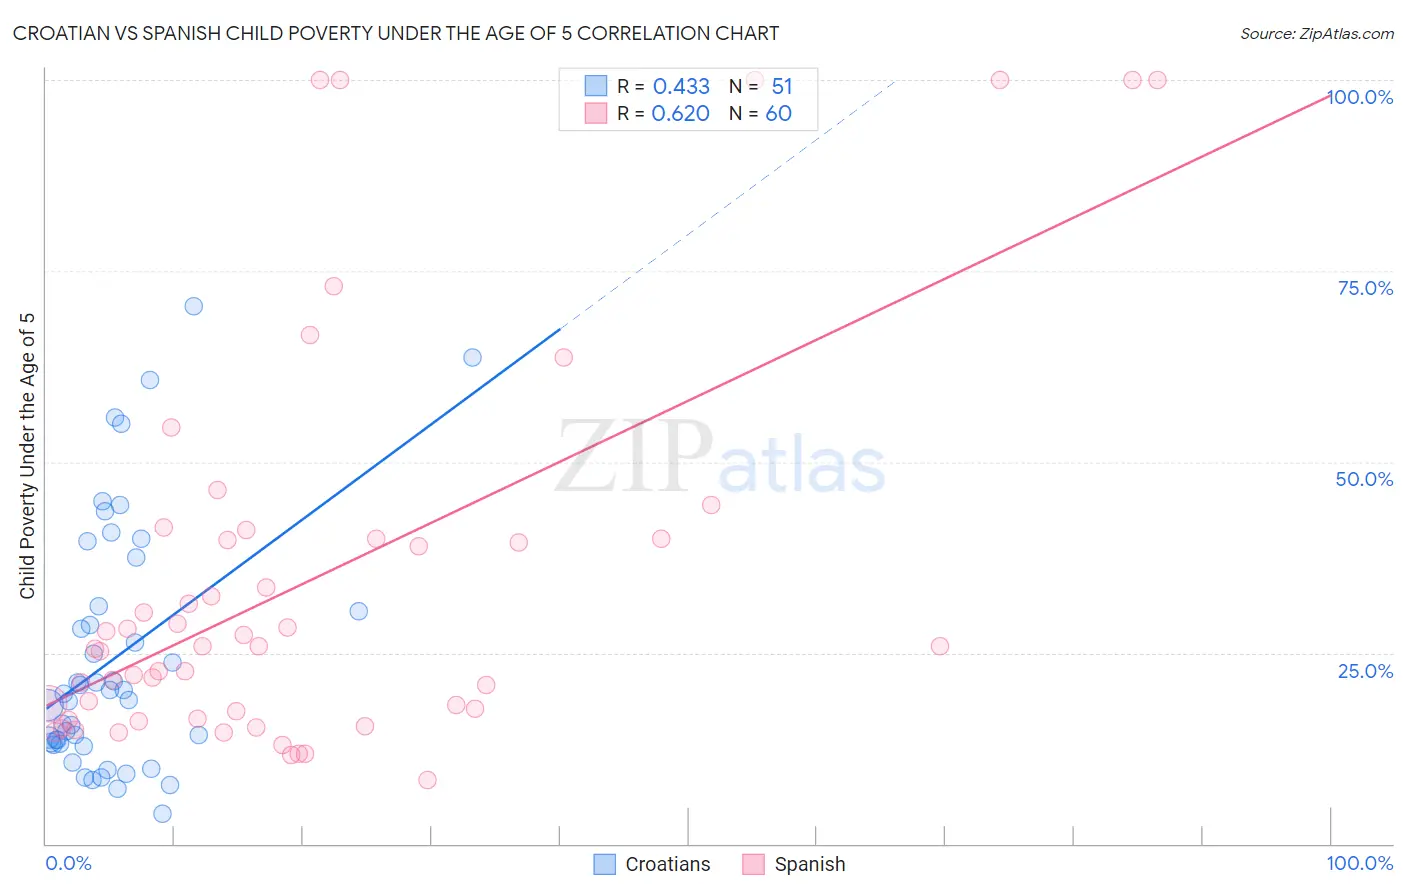 Croatian vs Spanish Child Poverty Under the Age of 5